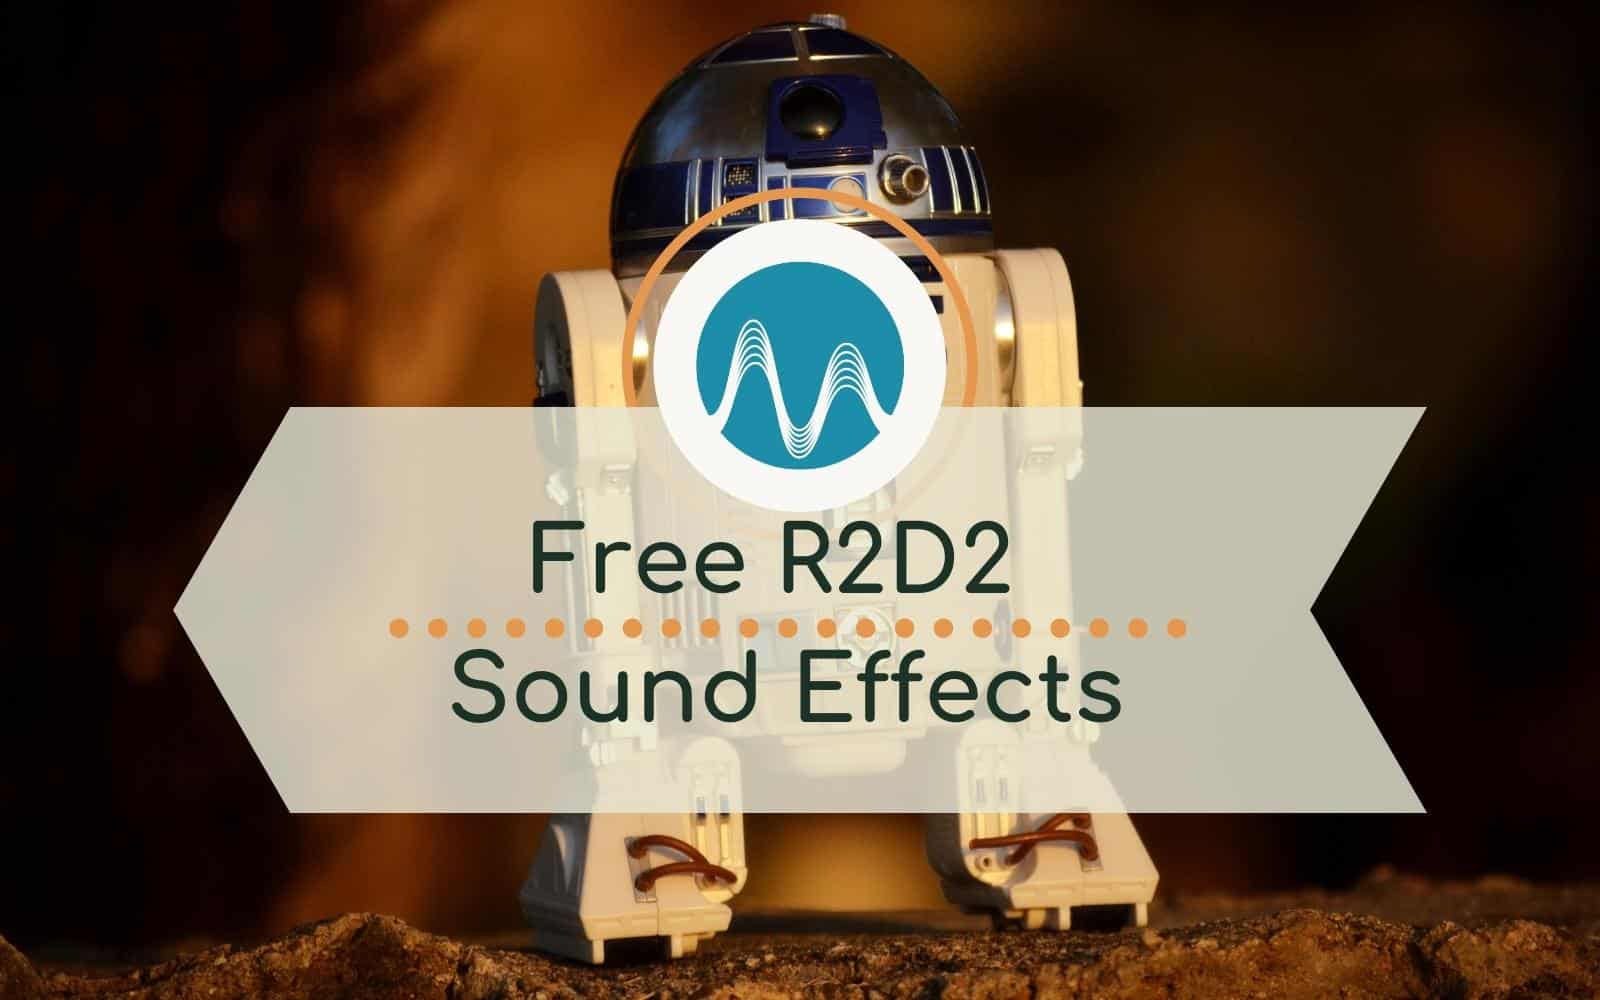 Free R2D2 Sounds Audio Editing r2d2 sounds Music Radio Creative